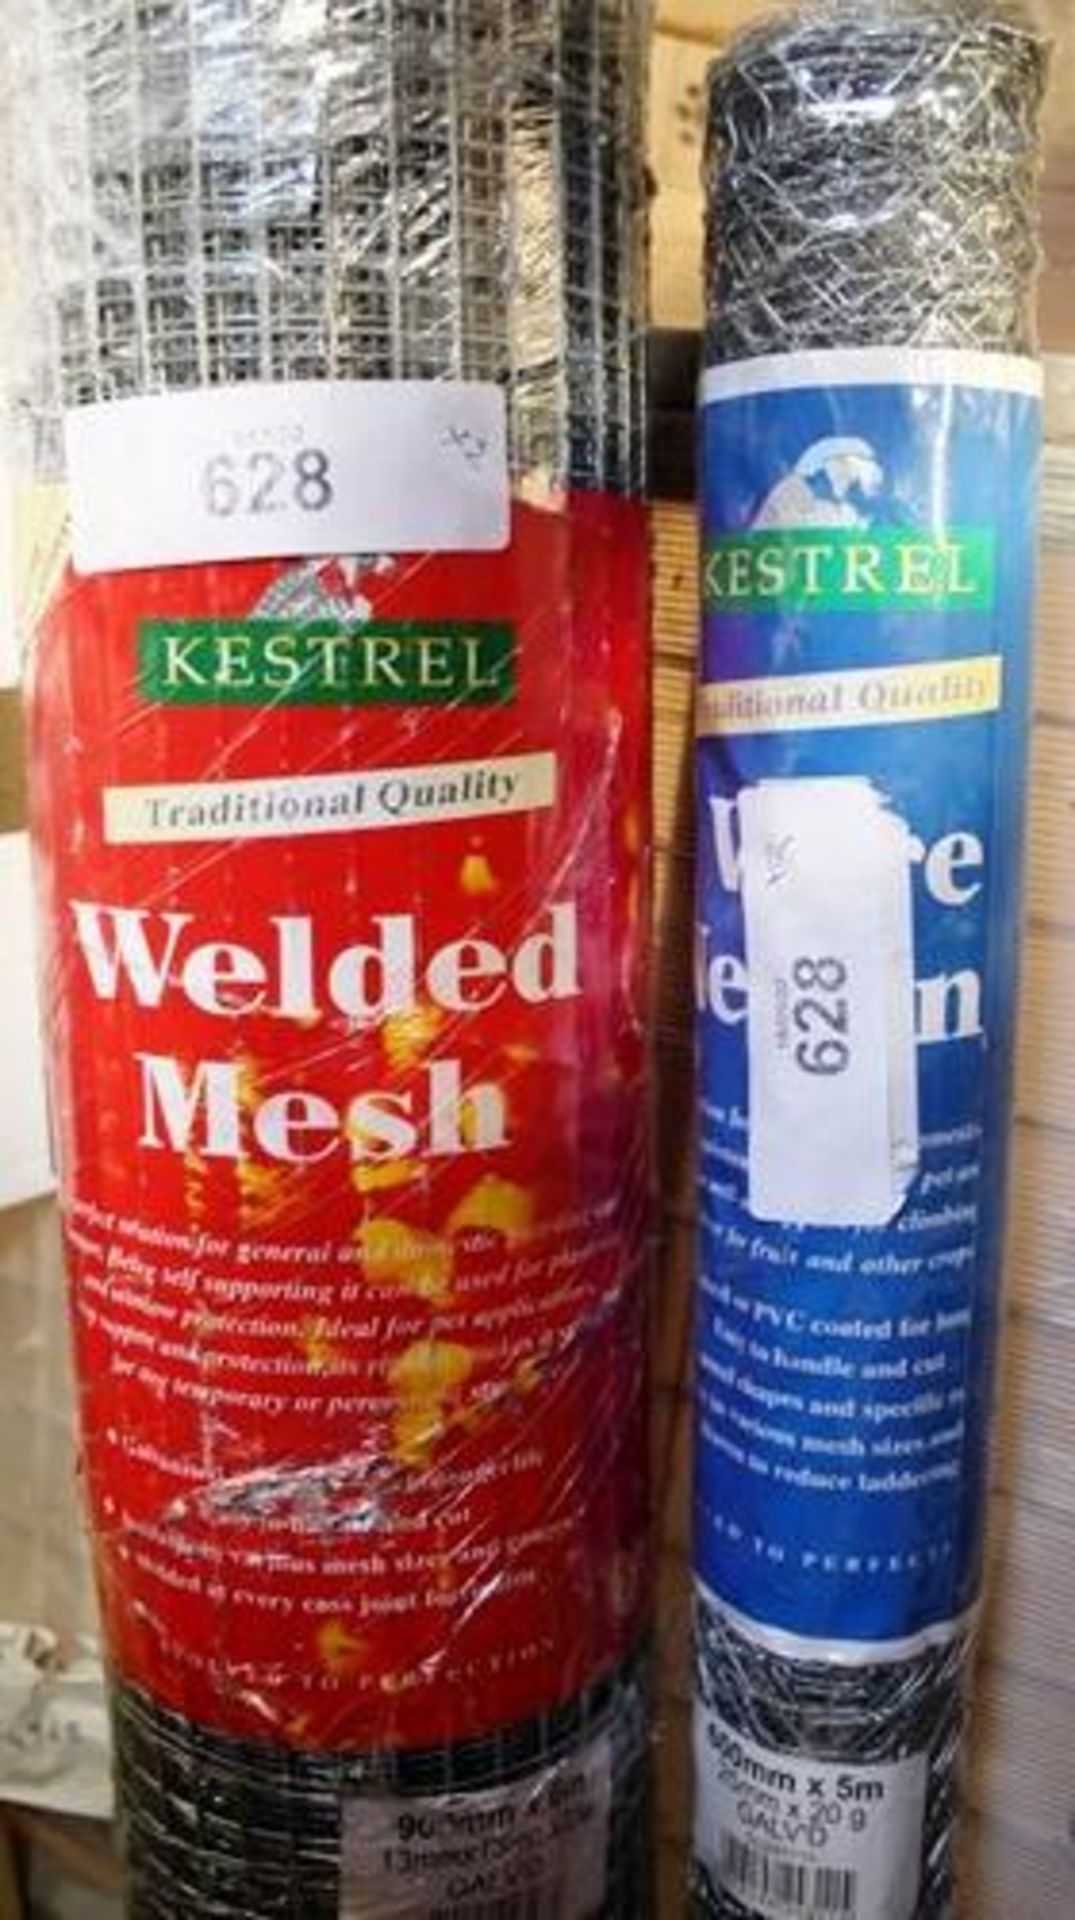 1 x roll of Kestrel welded mesh, size 6m x 900mm and 1 x roll of Kestrel wire, size 5m x 600mm - New